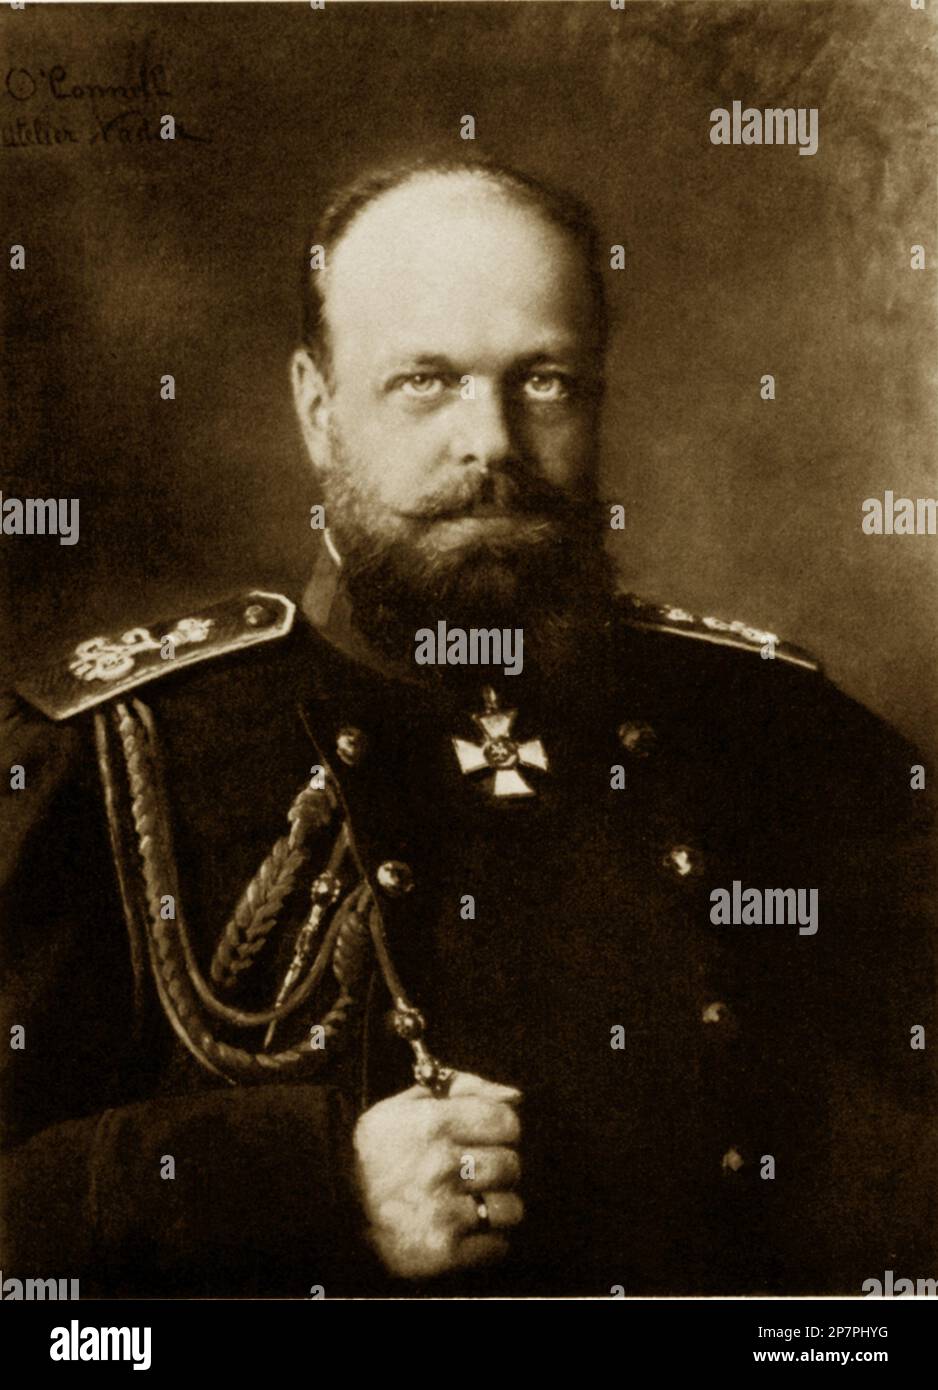 1885 ca , Paris , FRANCE : The russian Tsar ALEXANDER III ( 1845 –  1894 ) reigned as Emperor of Russia from  1881 until his death in 1894 . Second son of Tsar Alexander II by his wife Marie of Hesse-Darmstadt . Alexander III had six children of his marriage with Princess Dagmar of Denmark , also known as Marie Feodorovna .  Father of last Emperor of Russia , the Tsar Nicholas II ( 1868 - 1918 ), married in 1894 with Princess Alix of Hesse and by Rhine .  - foto storiche - foto storica  - beard - barba - portrait - ritratto - nobiltà - nobility - nobili  - nobile - BELLE EPOQUE  - RUSSIA - ZAR Stock Photo